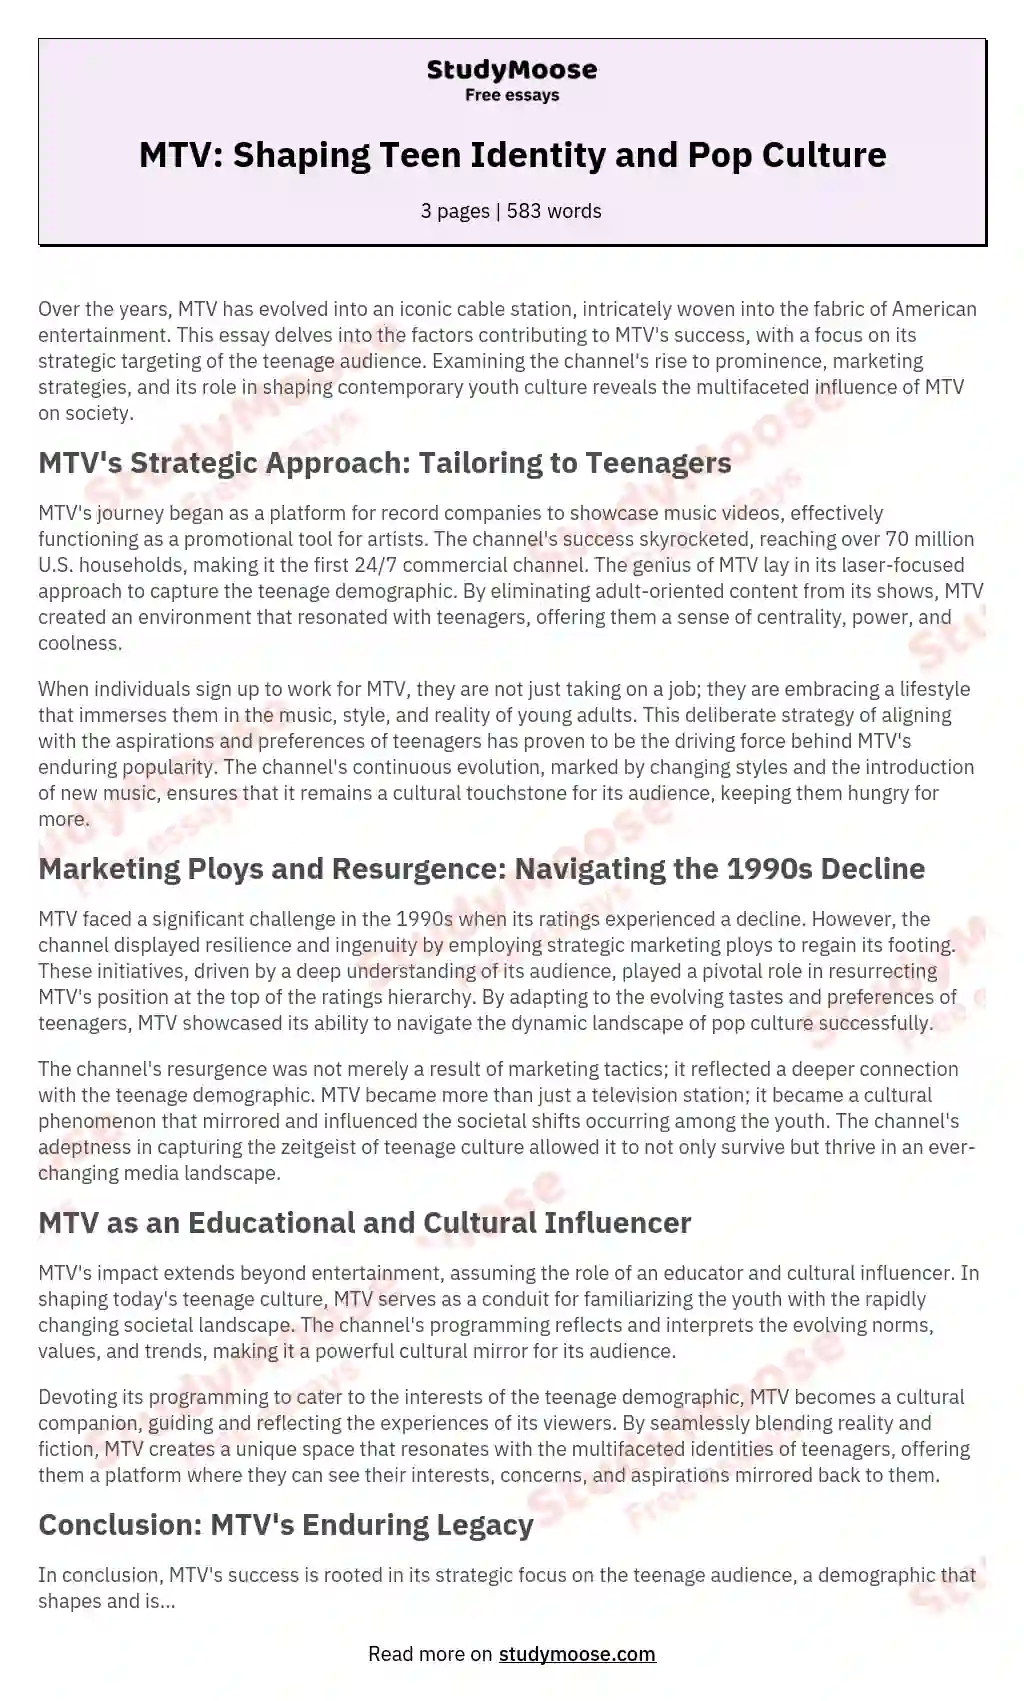 MTV: Shaping Teen Identity and Pop Culture essay